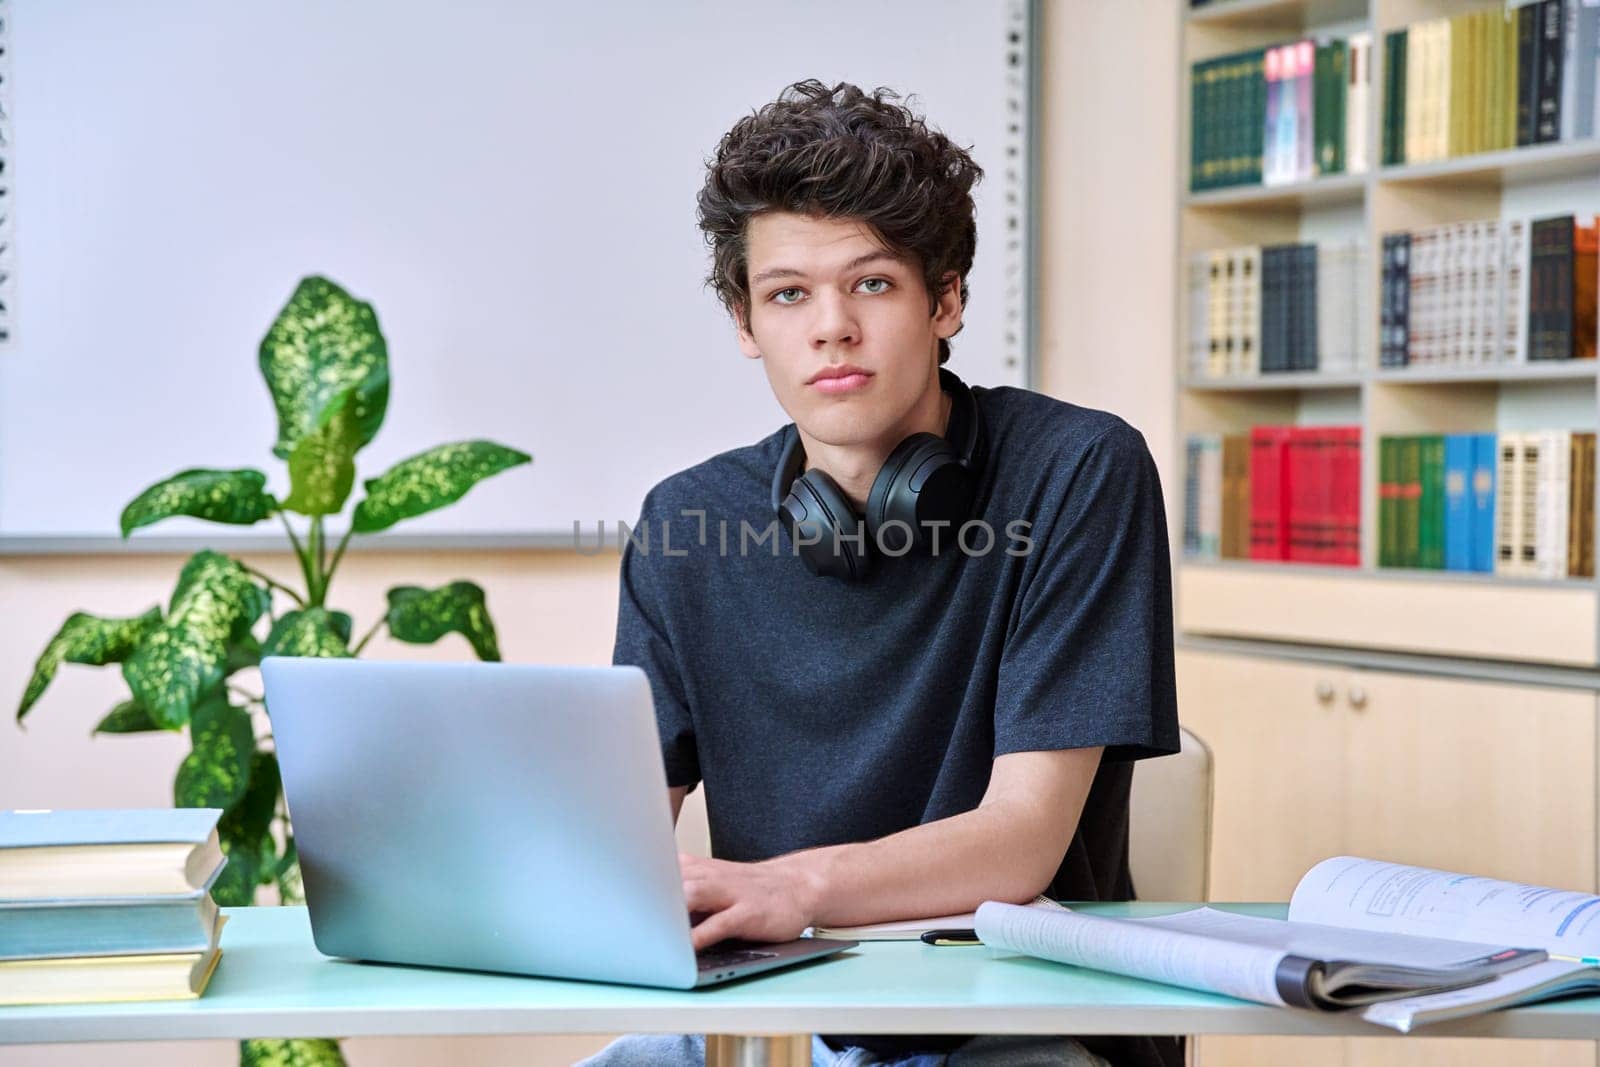 Portrait of college student guy sitting at desk with laptop computer and textbooks inside educational library classroom. Education internet technology e-learning learning services applications youth